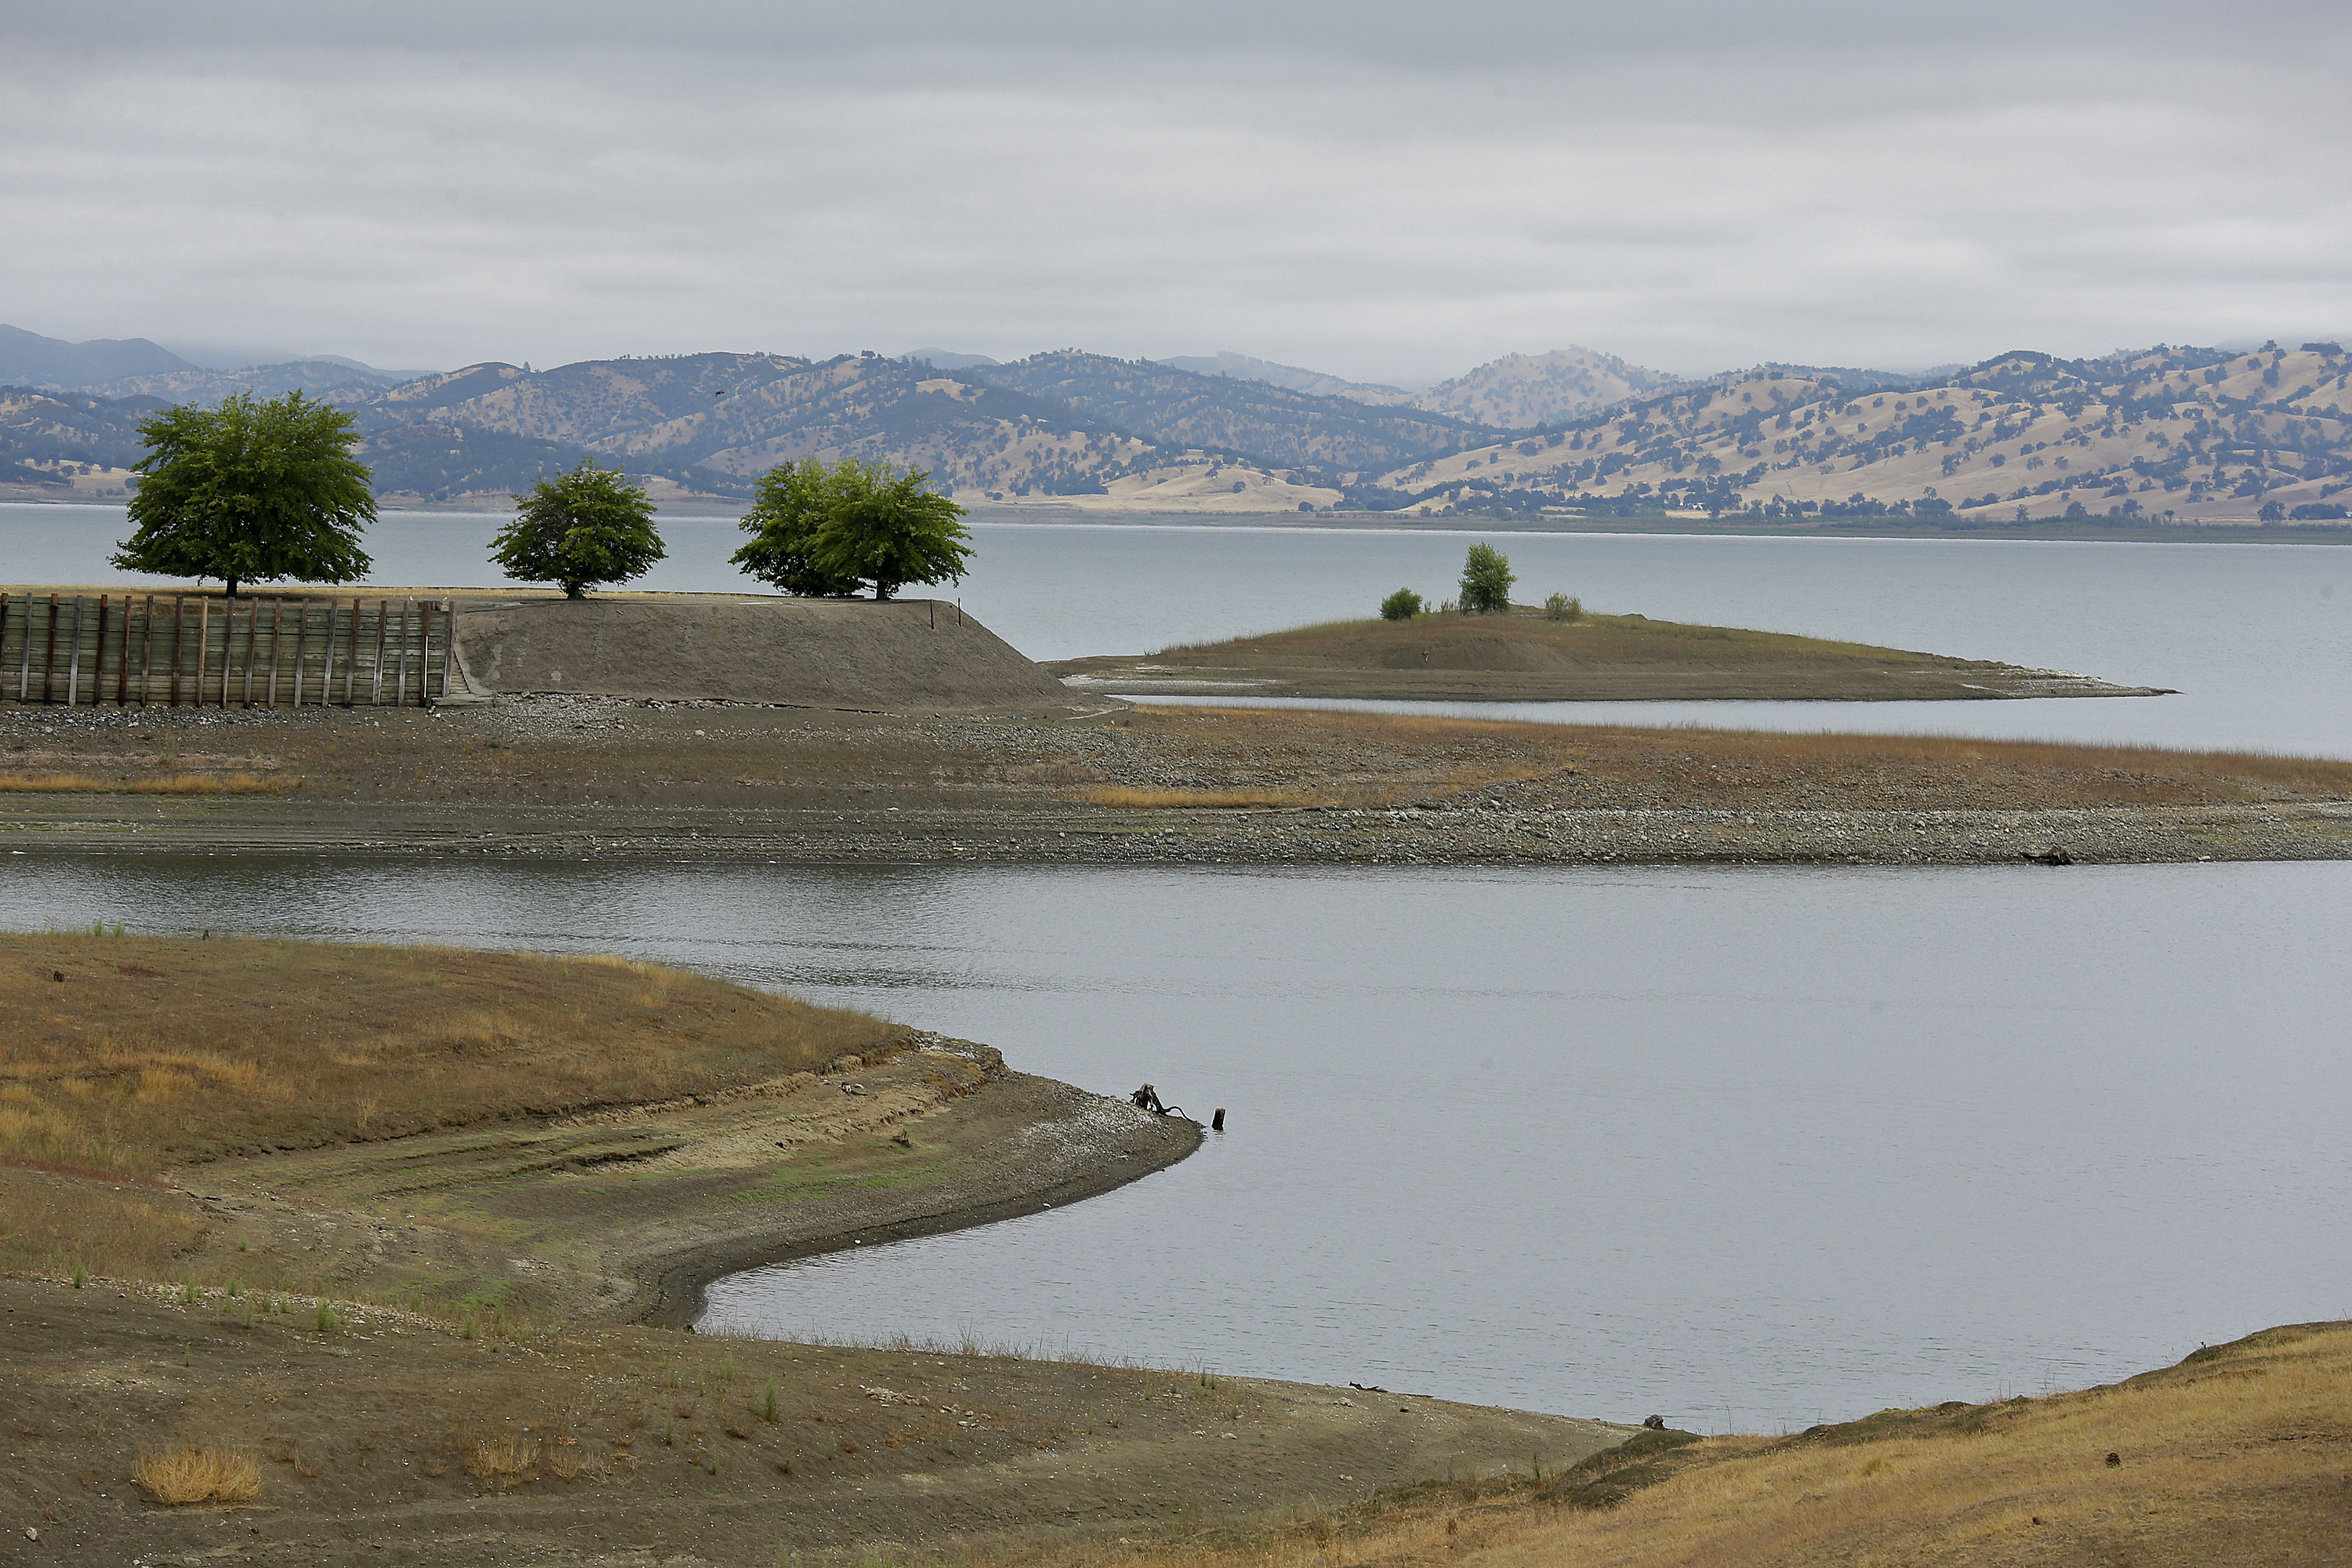 Carlifornia's Lake Berryessa. To contribute to global warming and compromise our planetary life systems is seen by many as morally problematic. Photo: AP